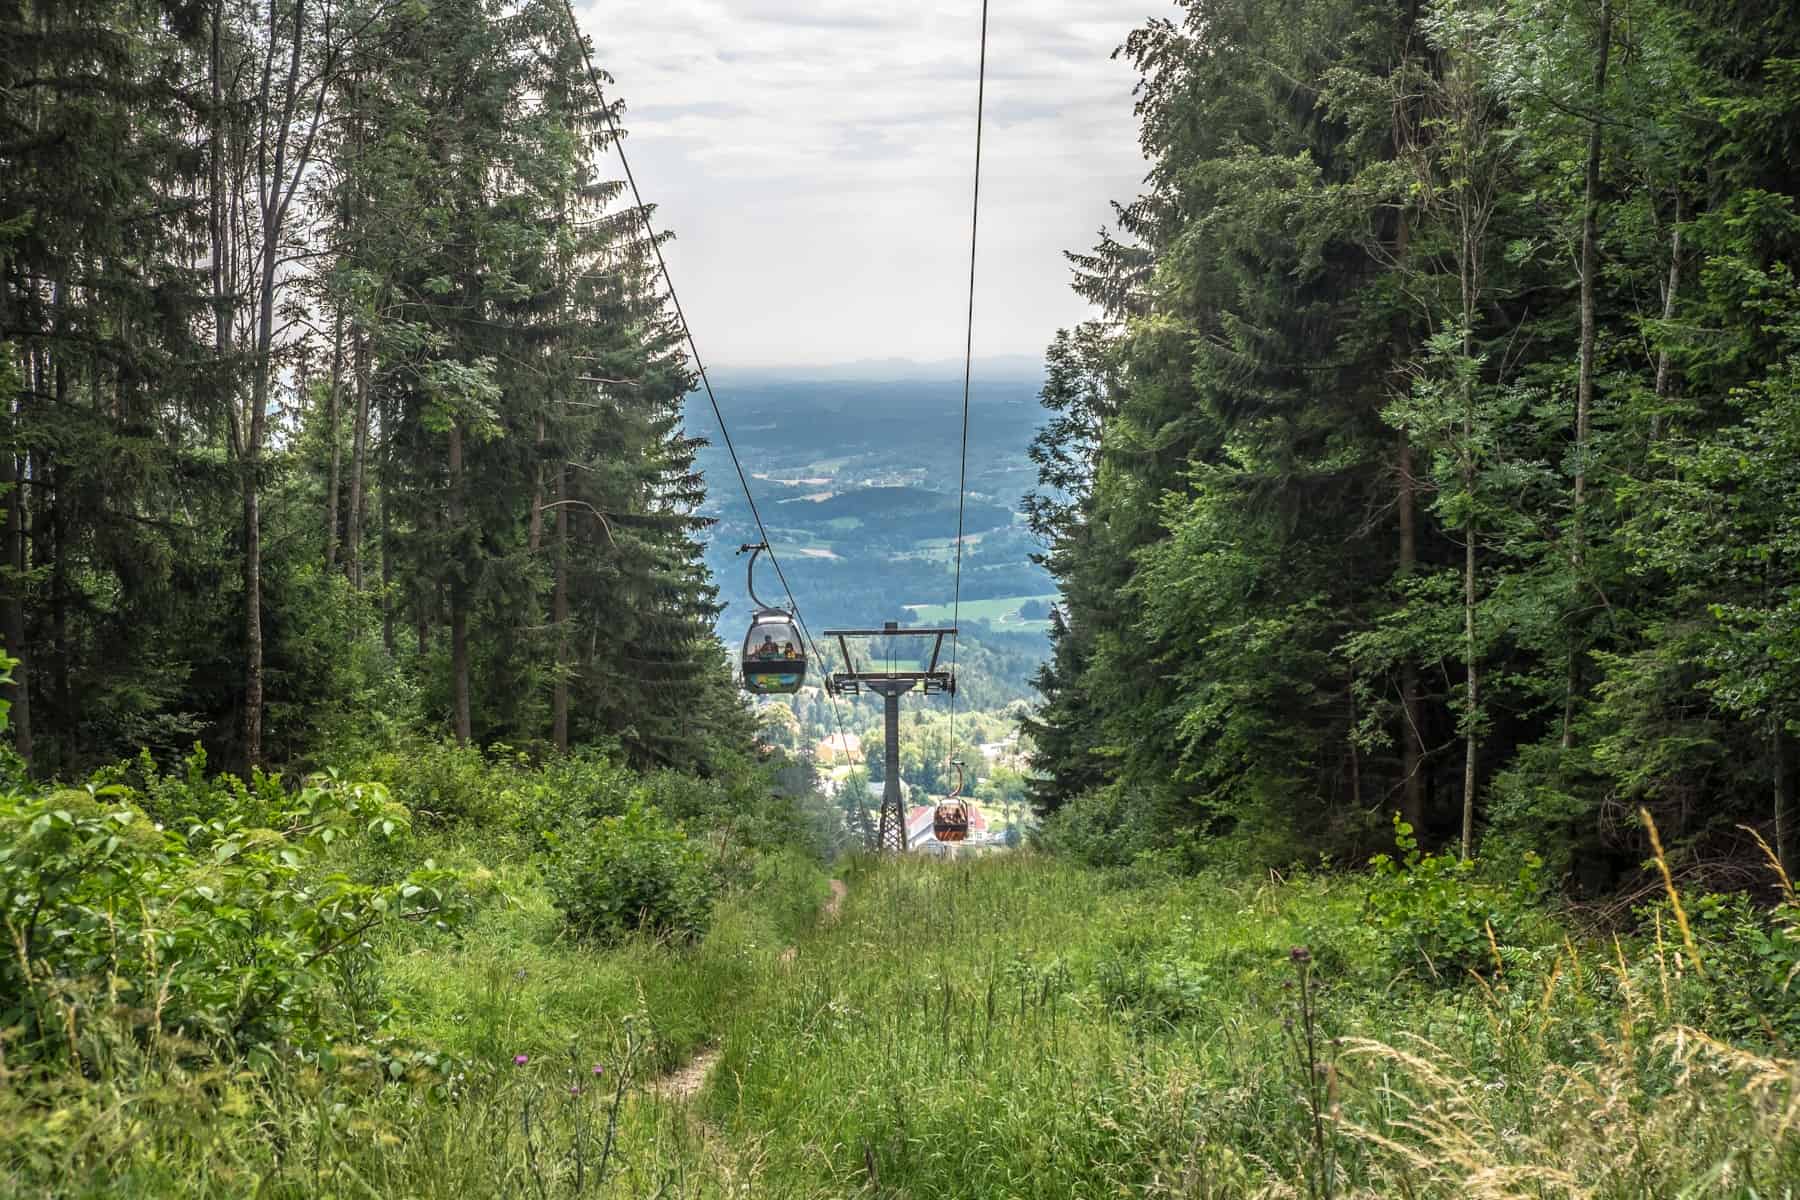 A cable car passes through an opening in the forest trees on Schöckl Mountain near Graz, Austria